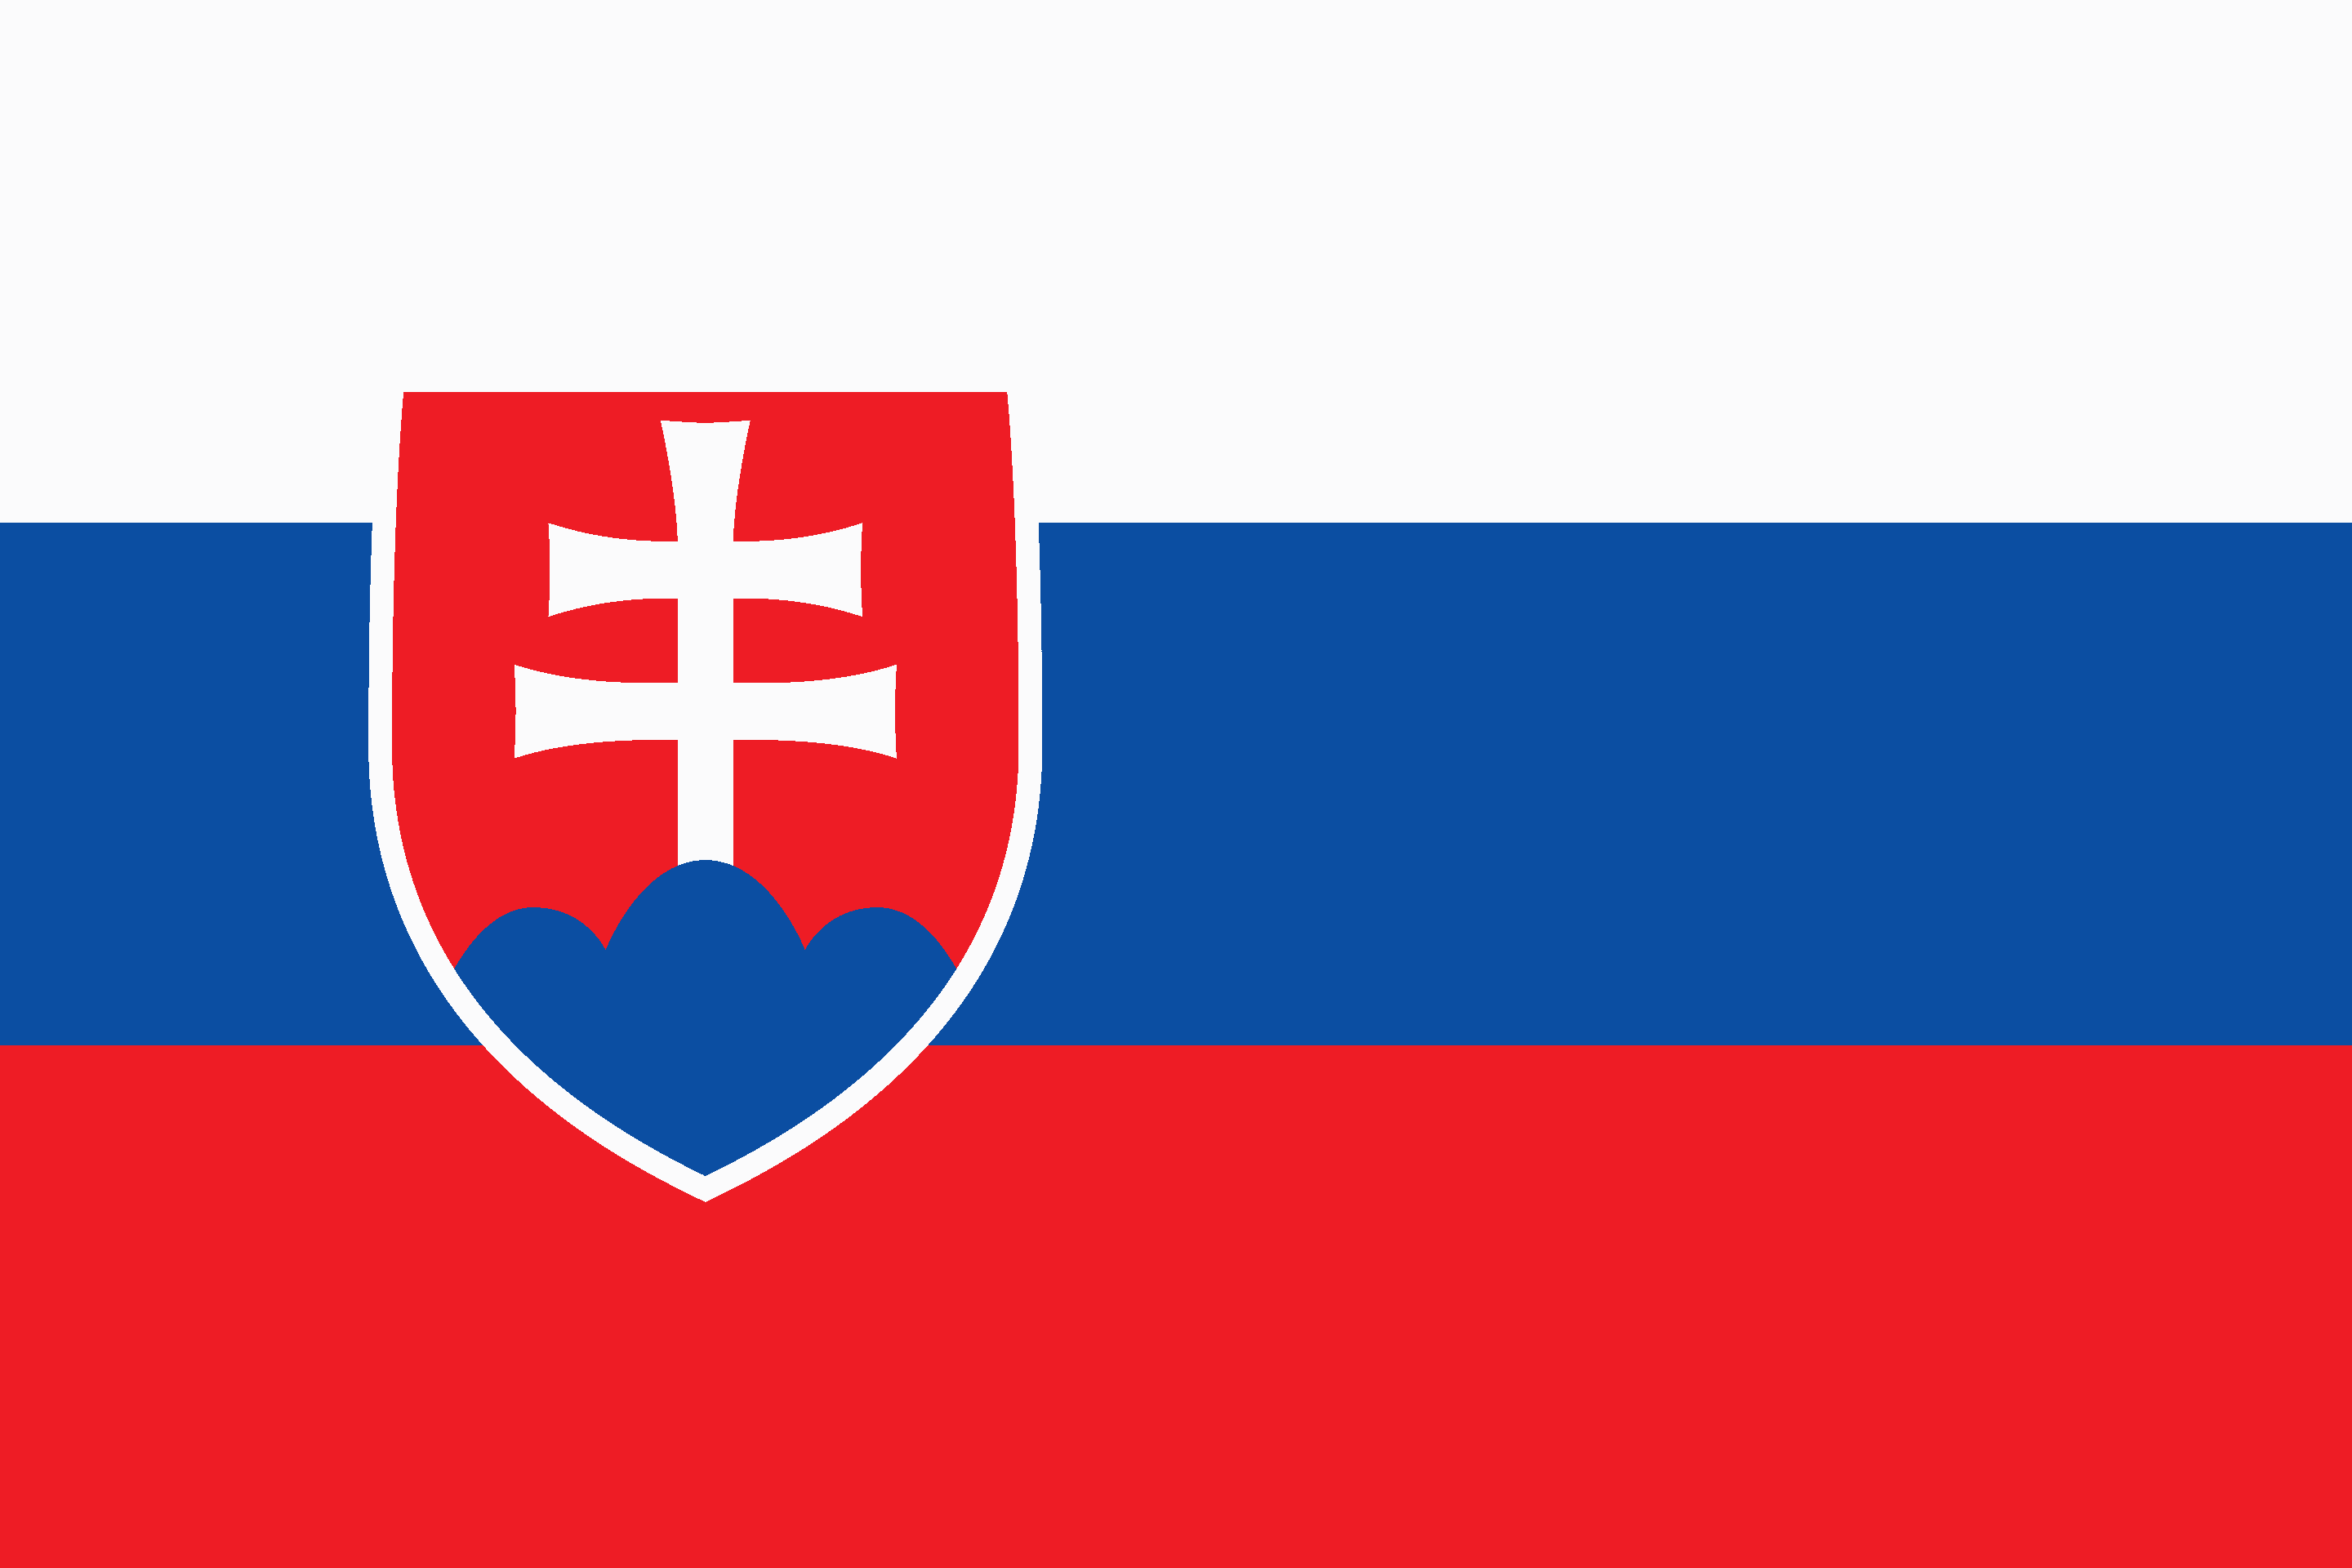 Drone Laws in Slovakia